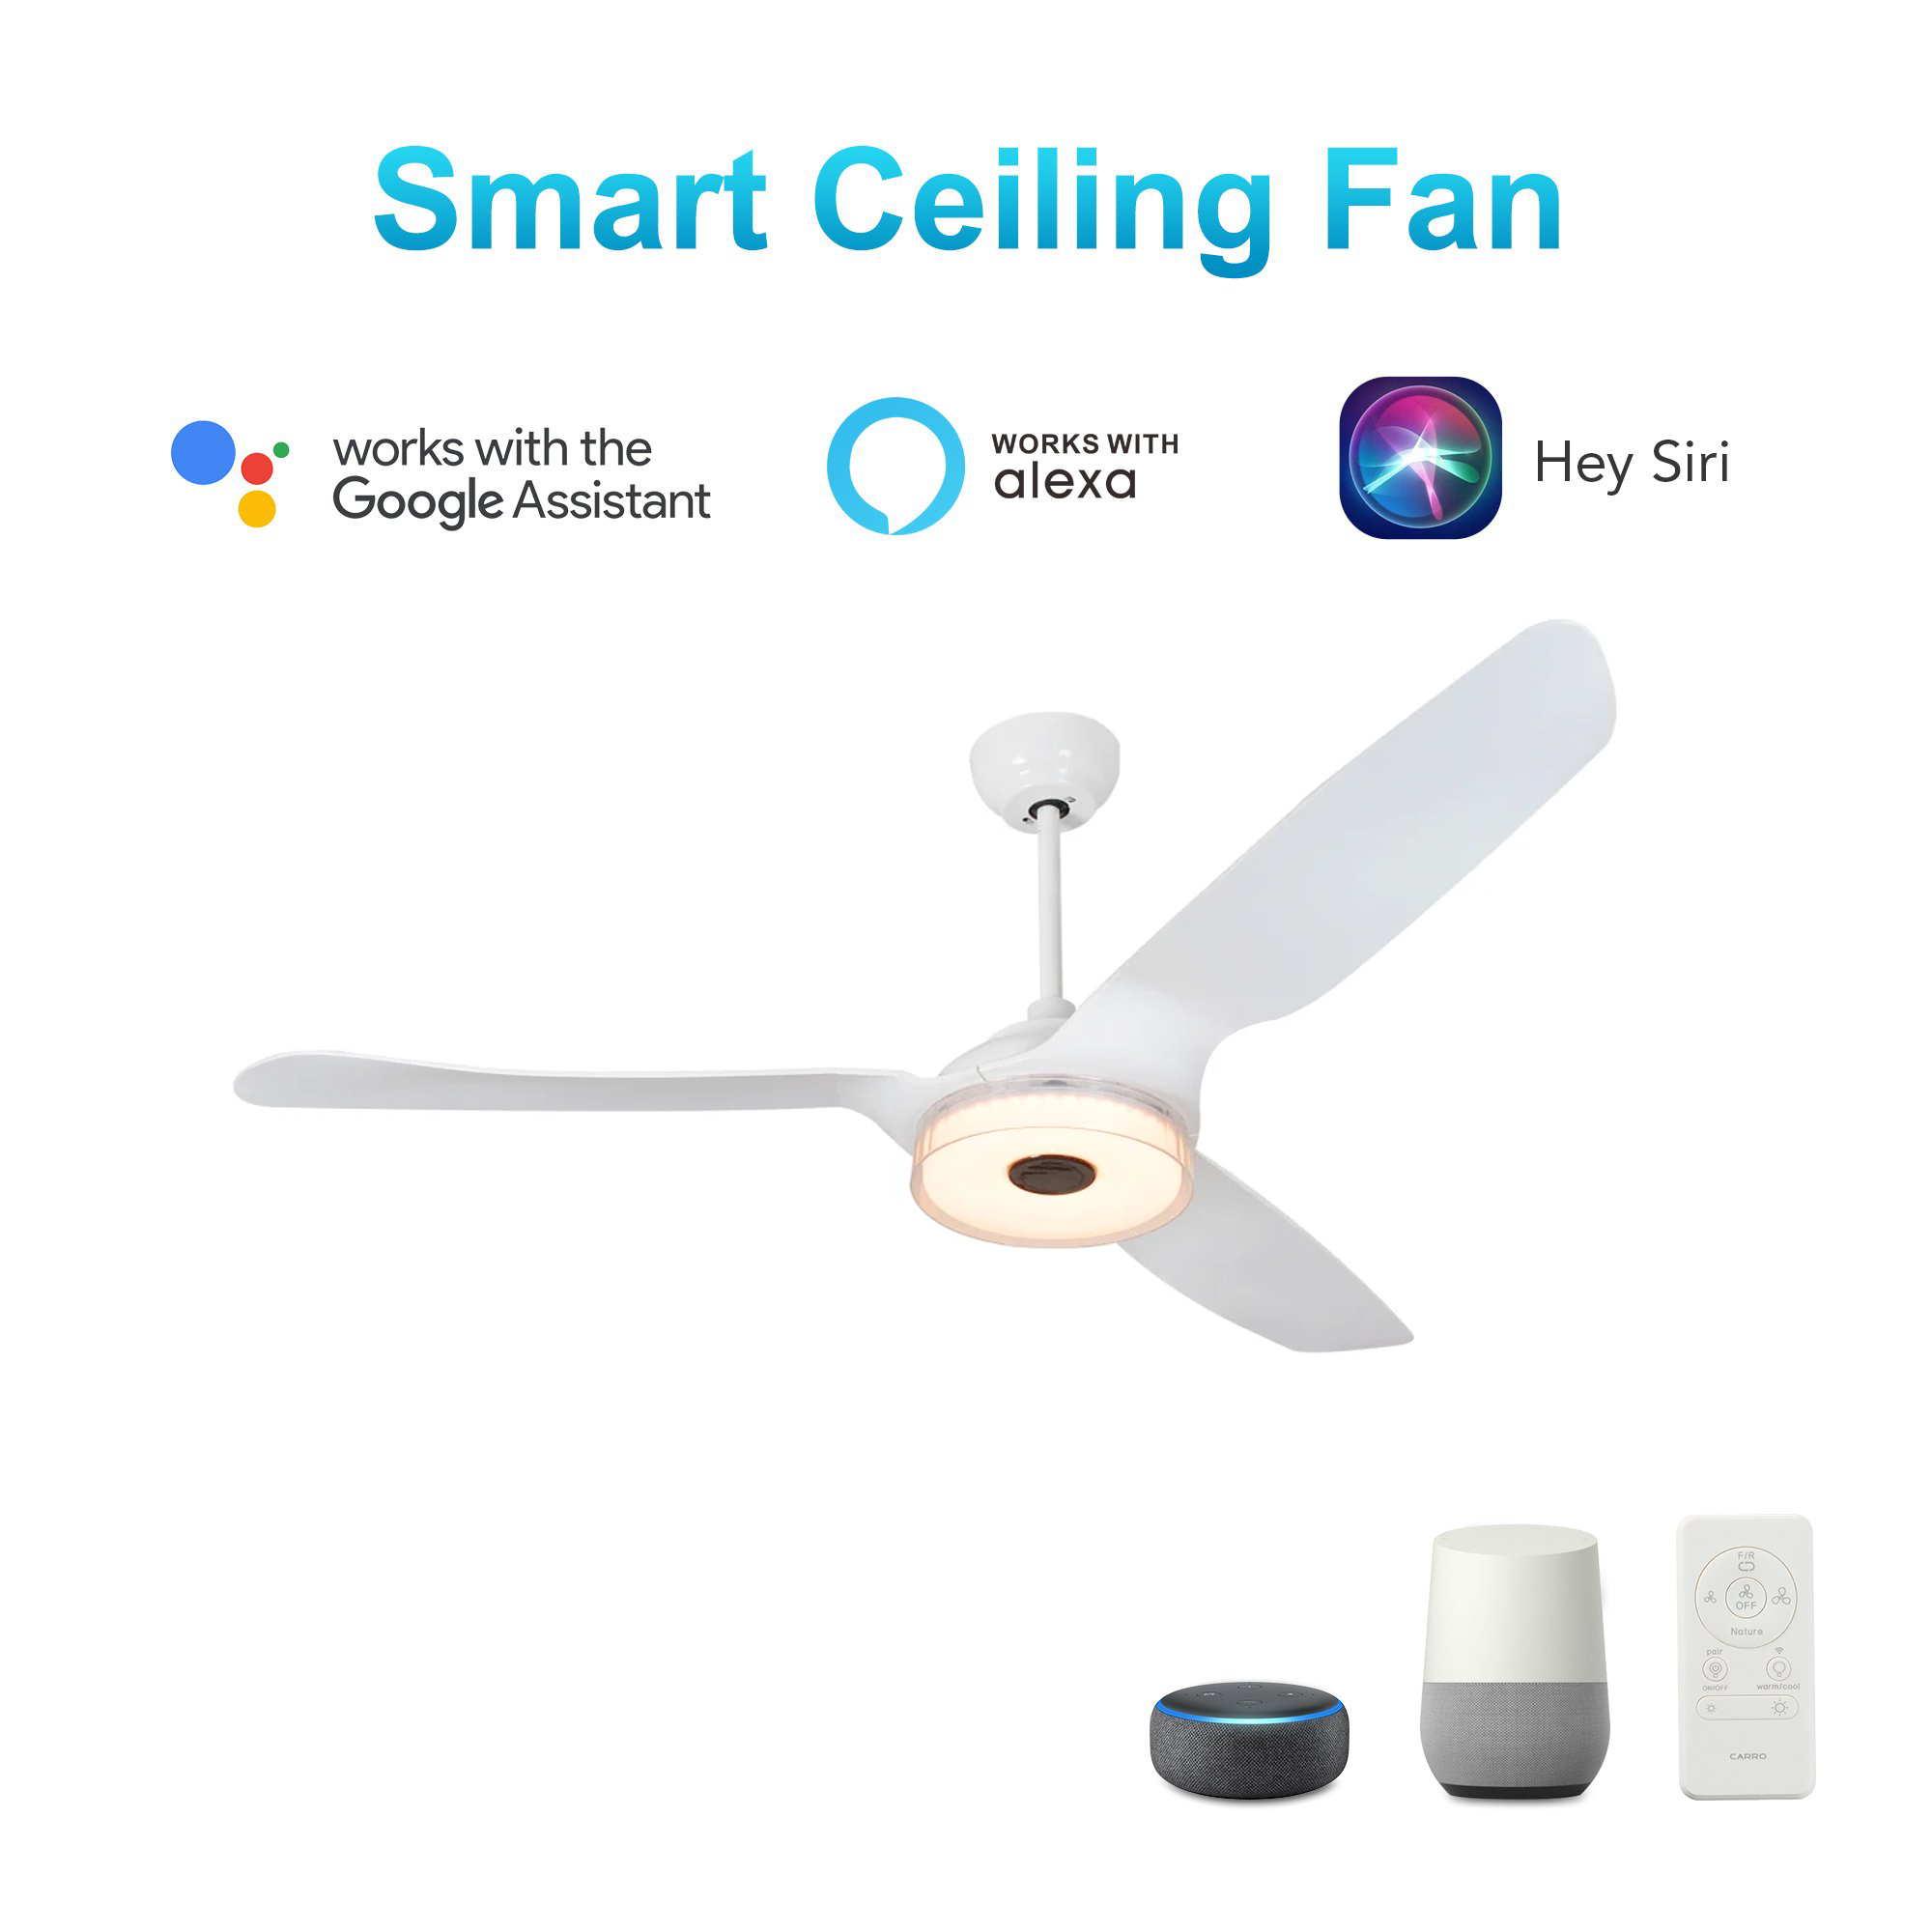 Icebreaker White/White 3 Blade Smart Ceiling Fan with Dimmable LED Light Kit Works with Remote Control, Wi-Fi apps and Voice control via Google Assistant/Alexa/Siri (Set of 2)